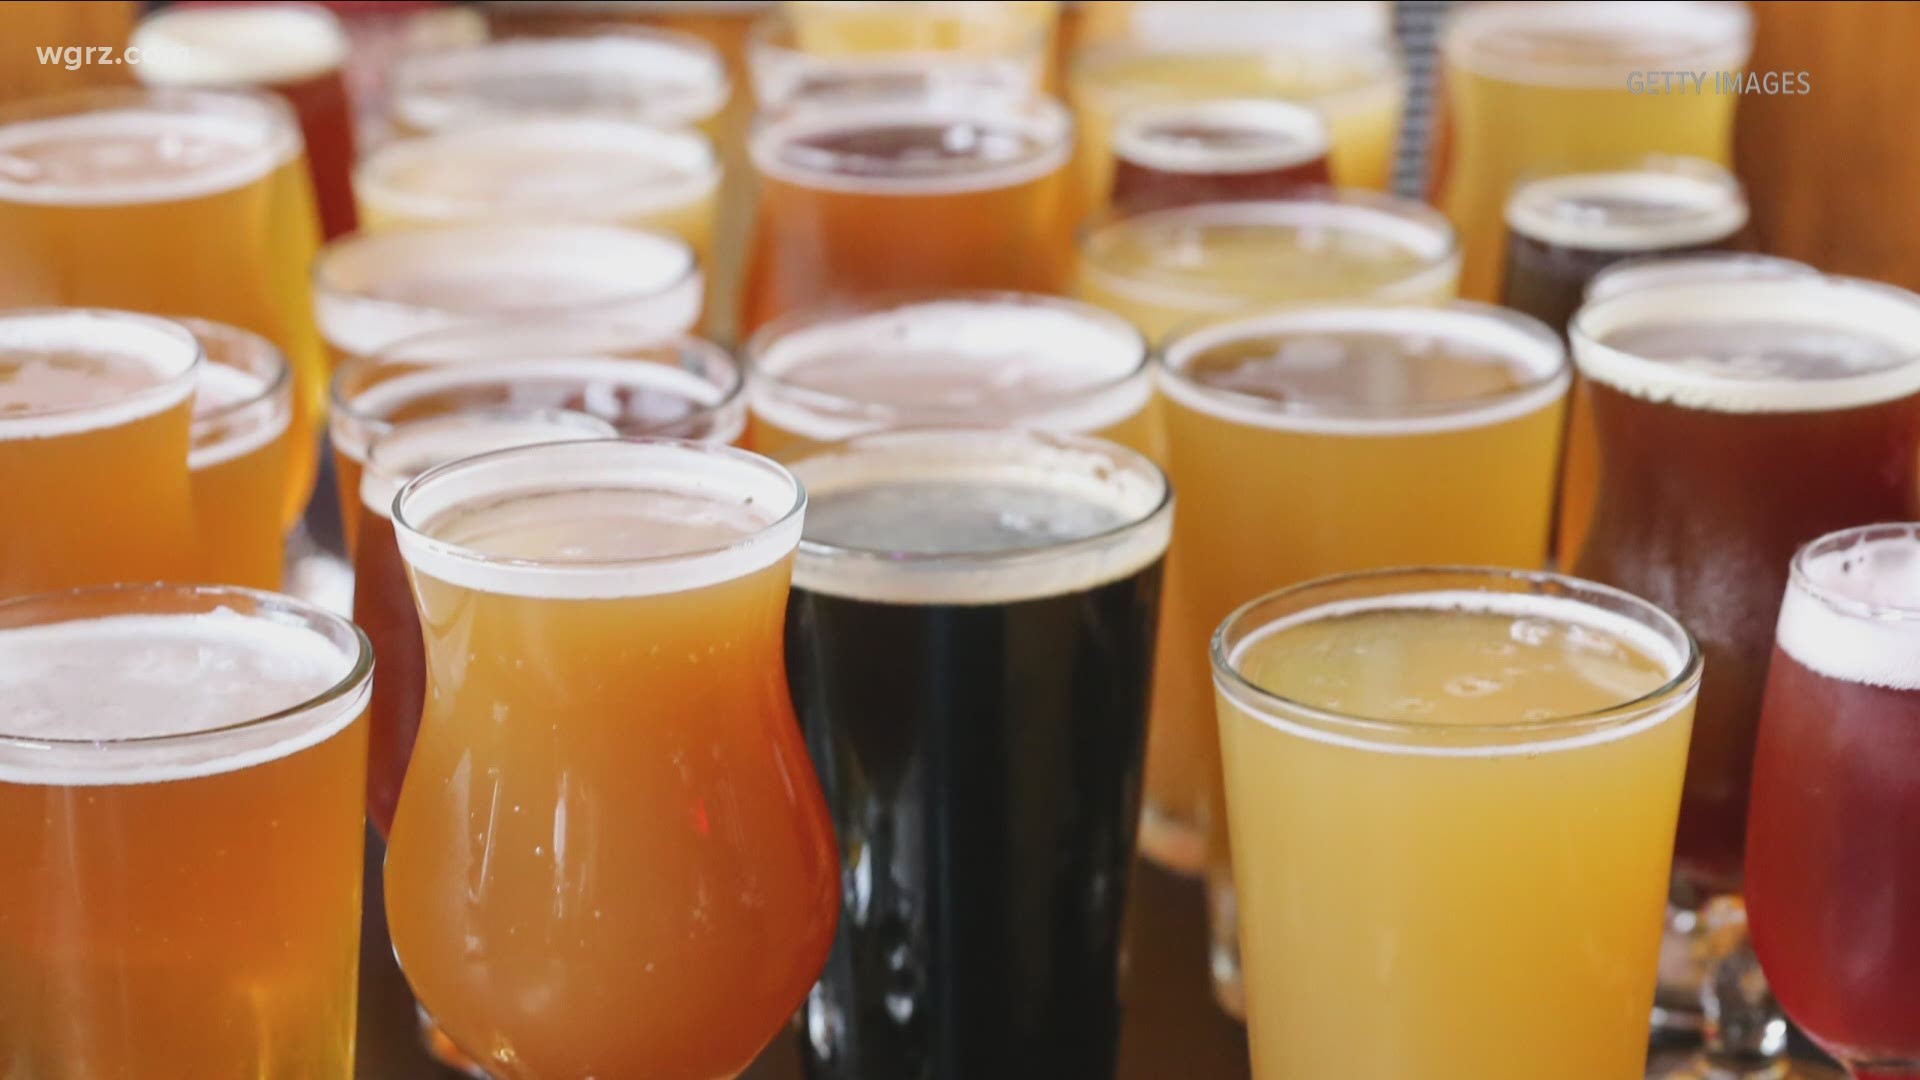 Website shows all craft breweries in WNY